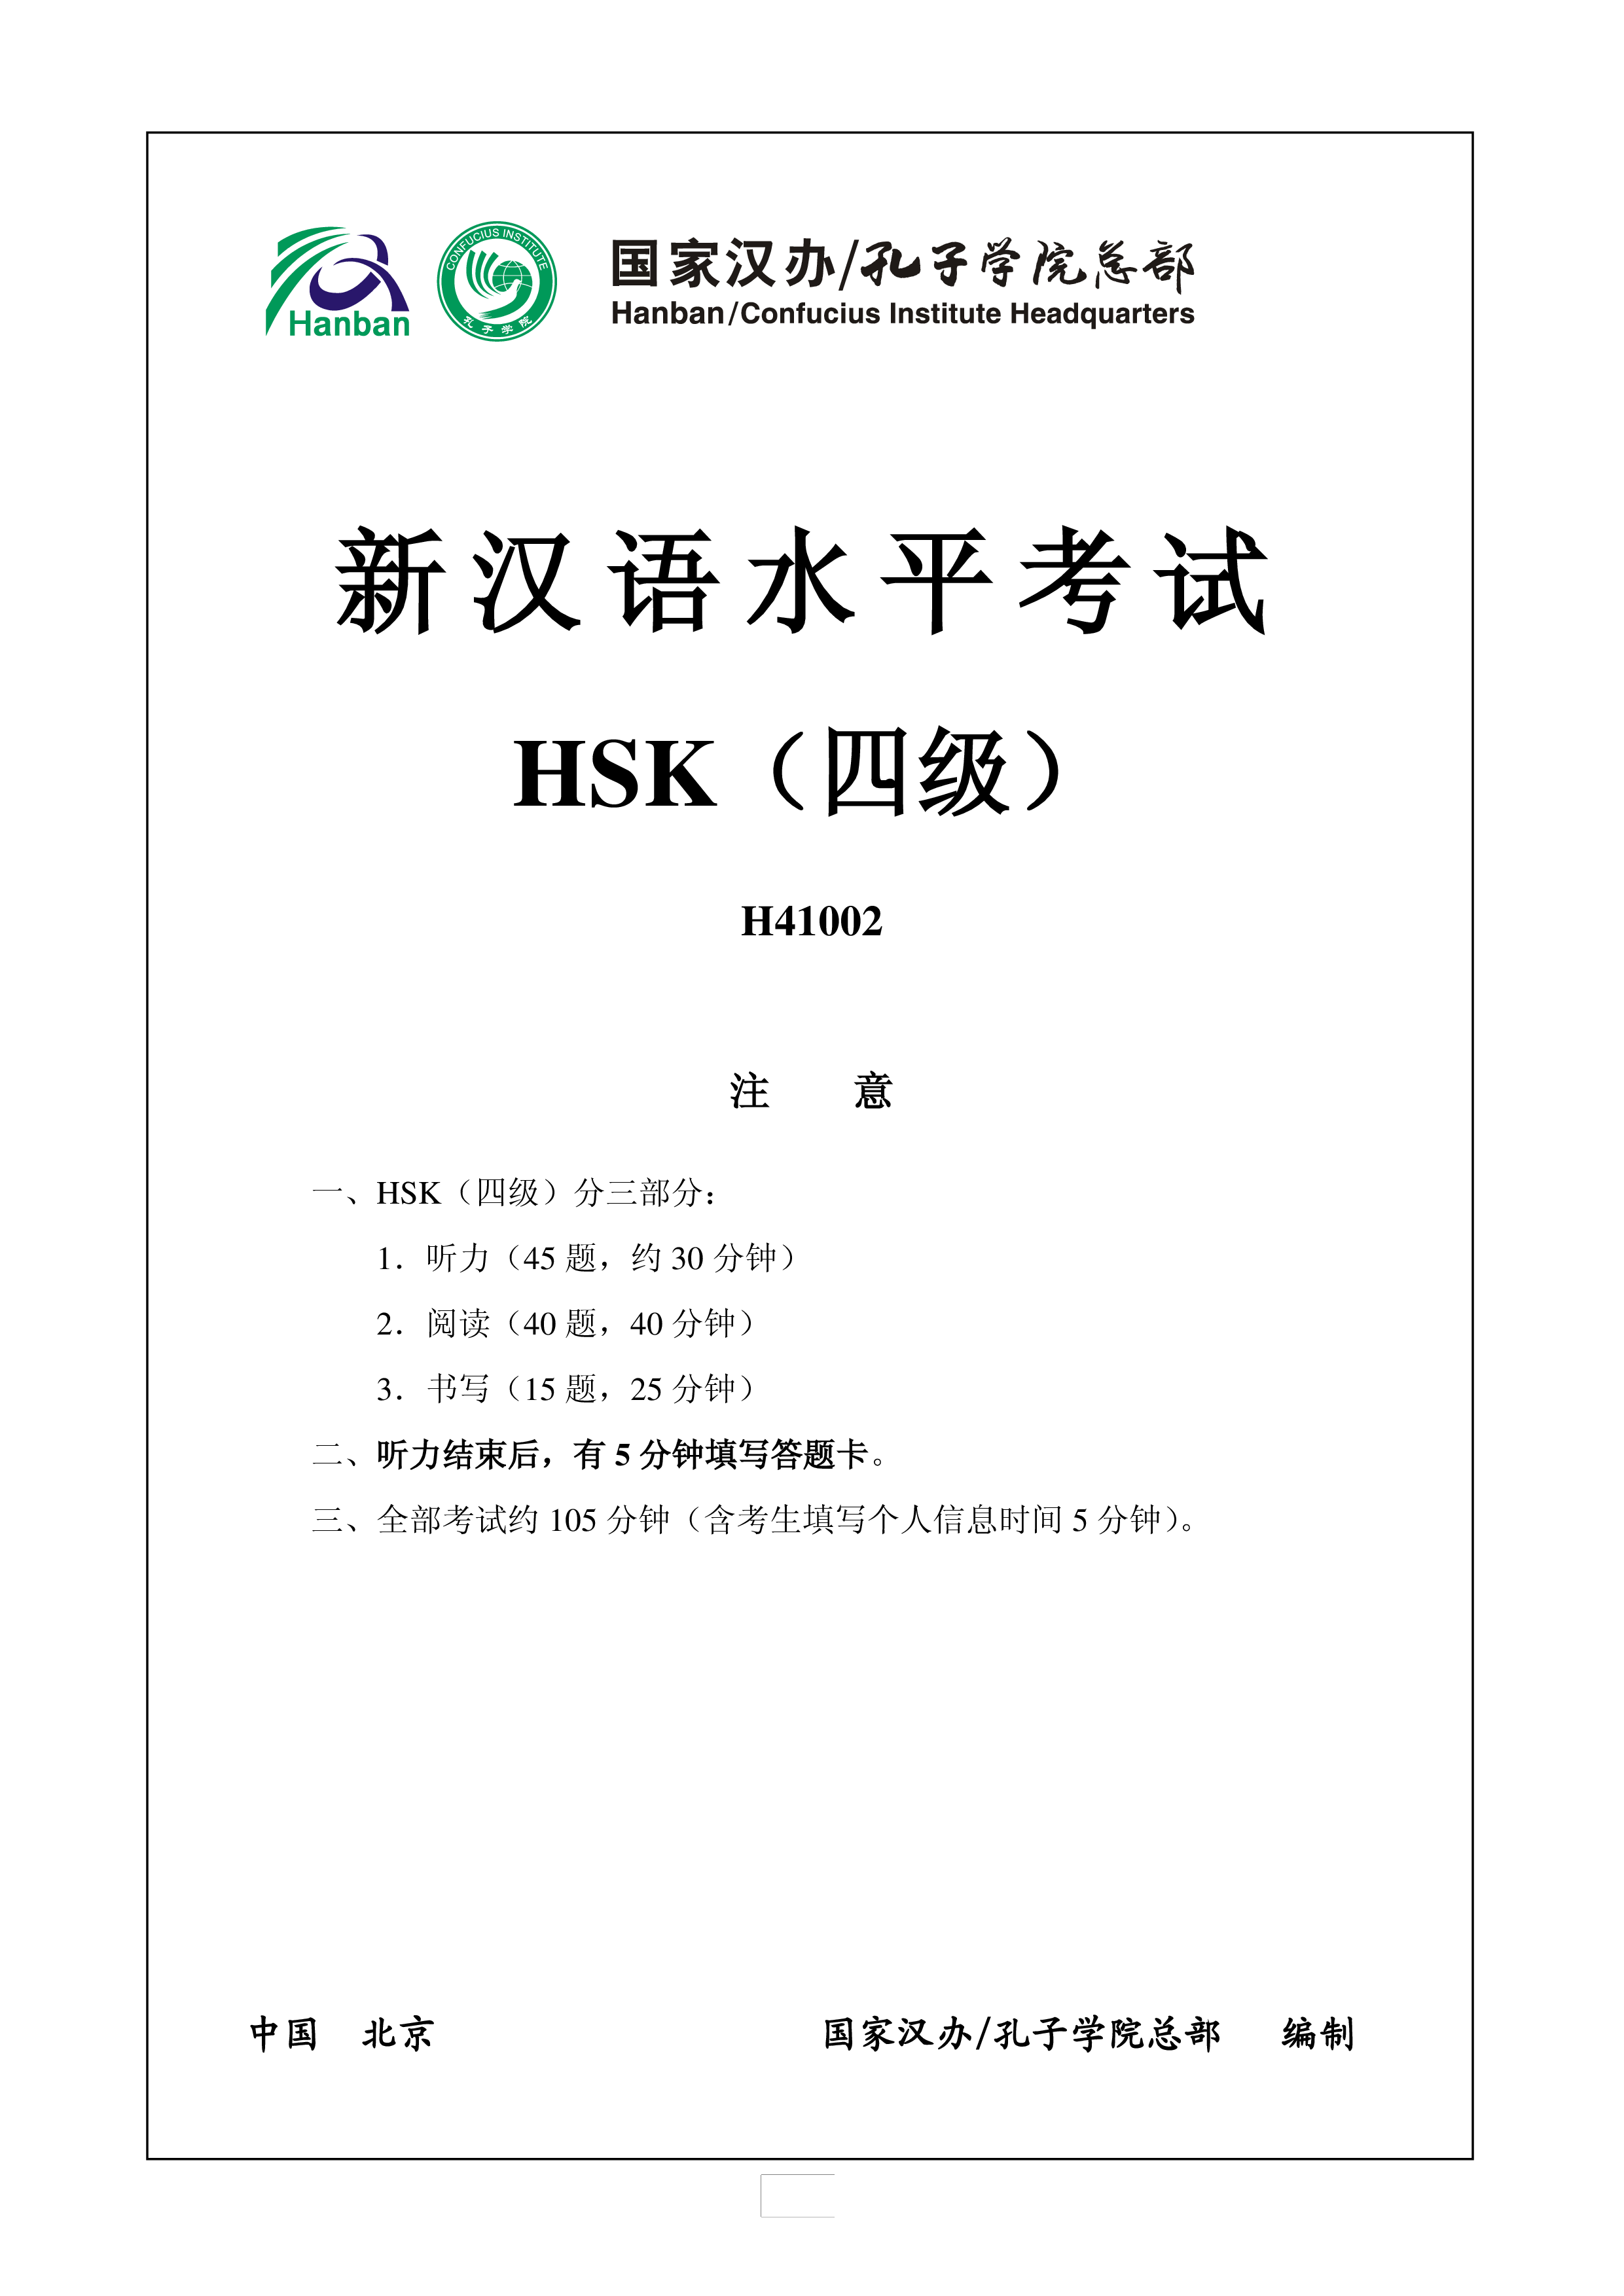 HSK4 Chinese Exam including Answers # HSK H41002 main image